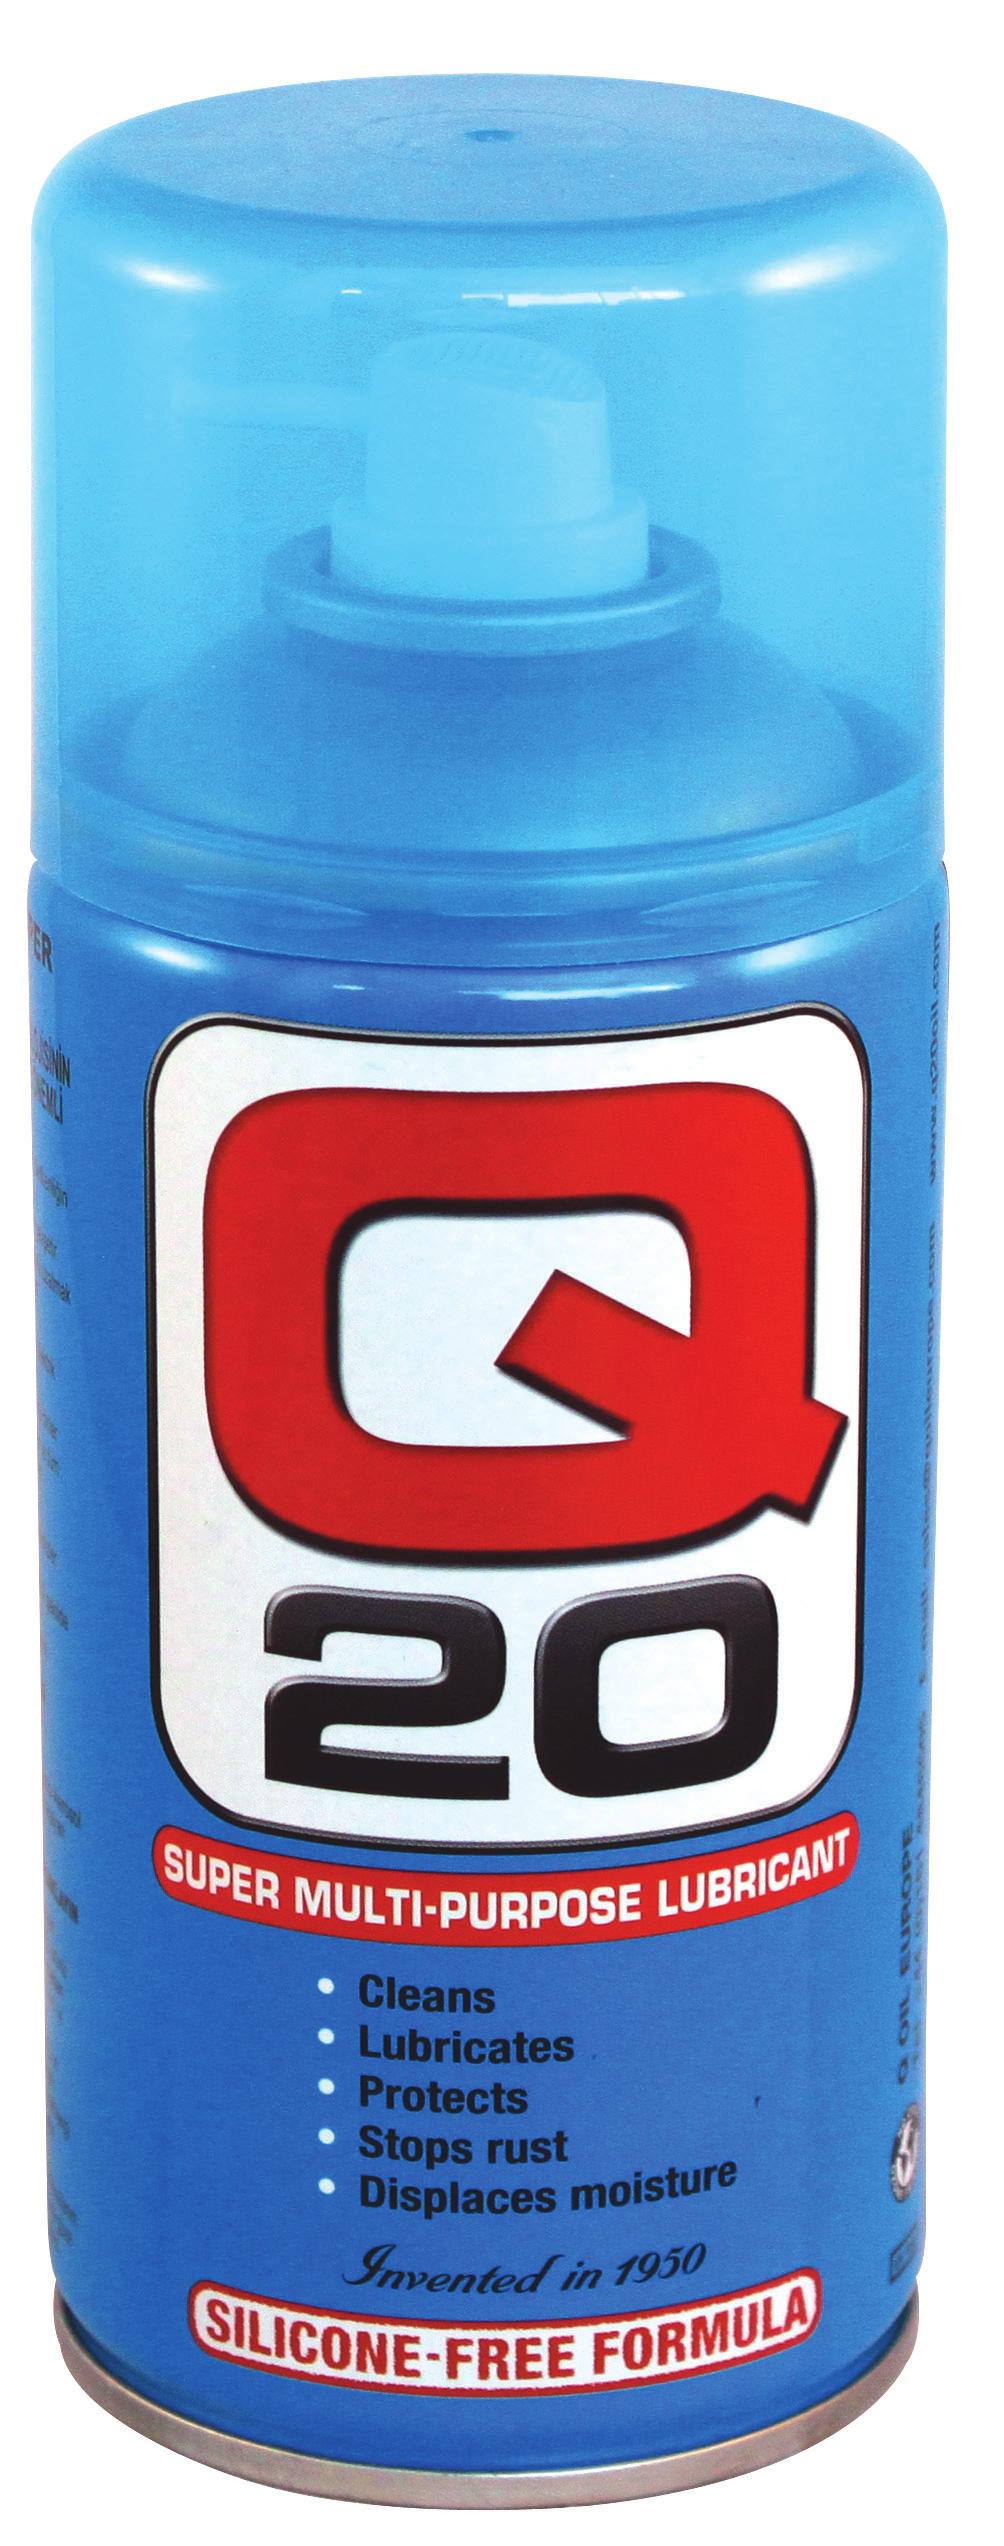 20 super multi-purpose lubricant displaces moisture stops rust lubricates Cleans ProteCts stuck in a tight spot?